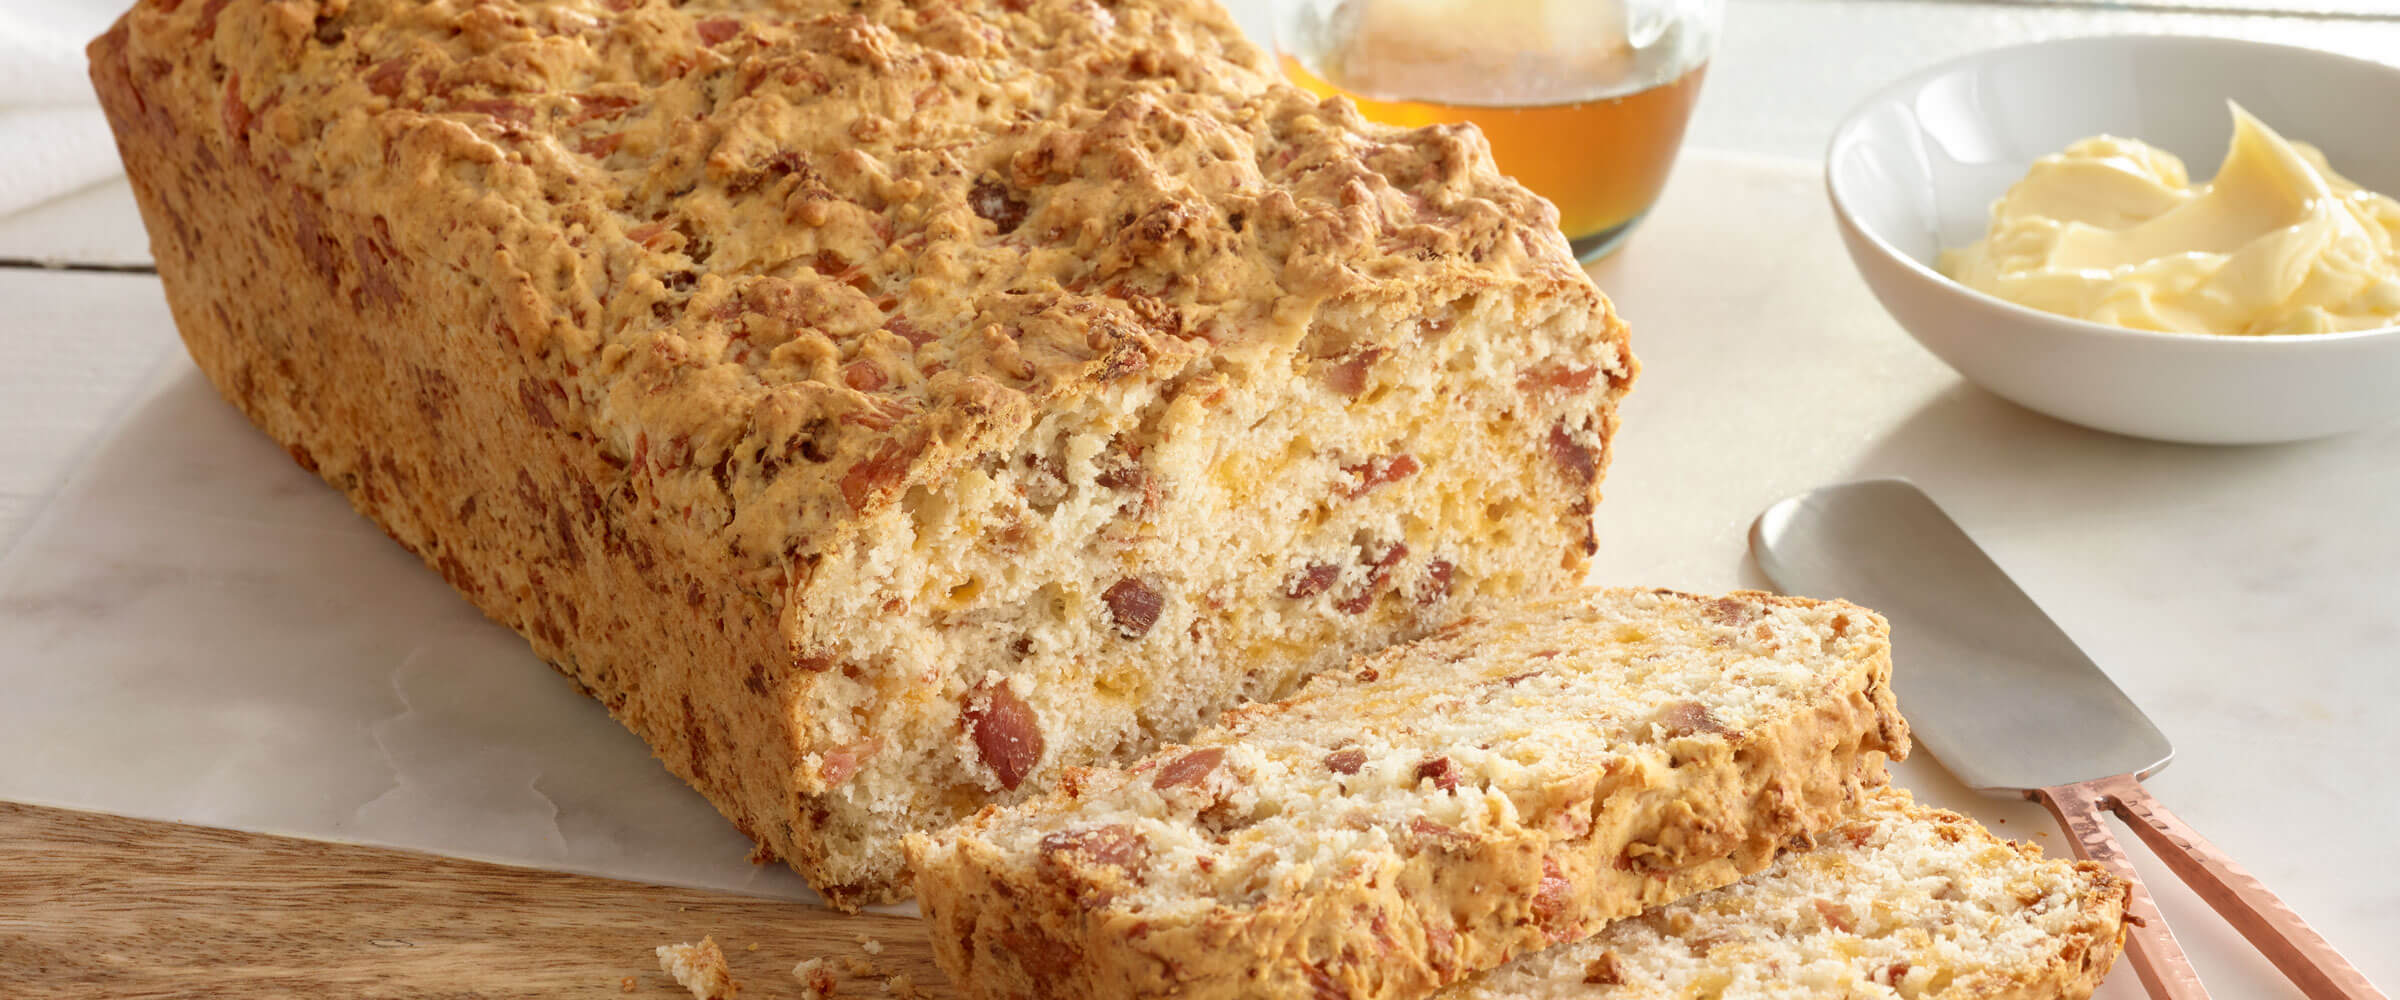 Bacon-Beer Cheese Bread sliced with dish of butter